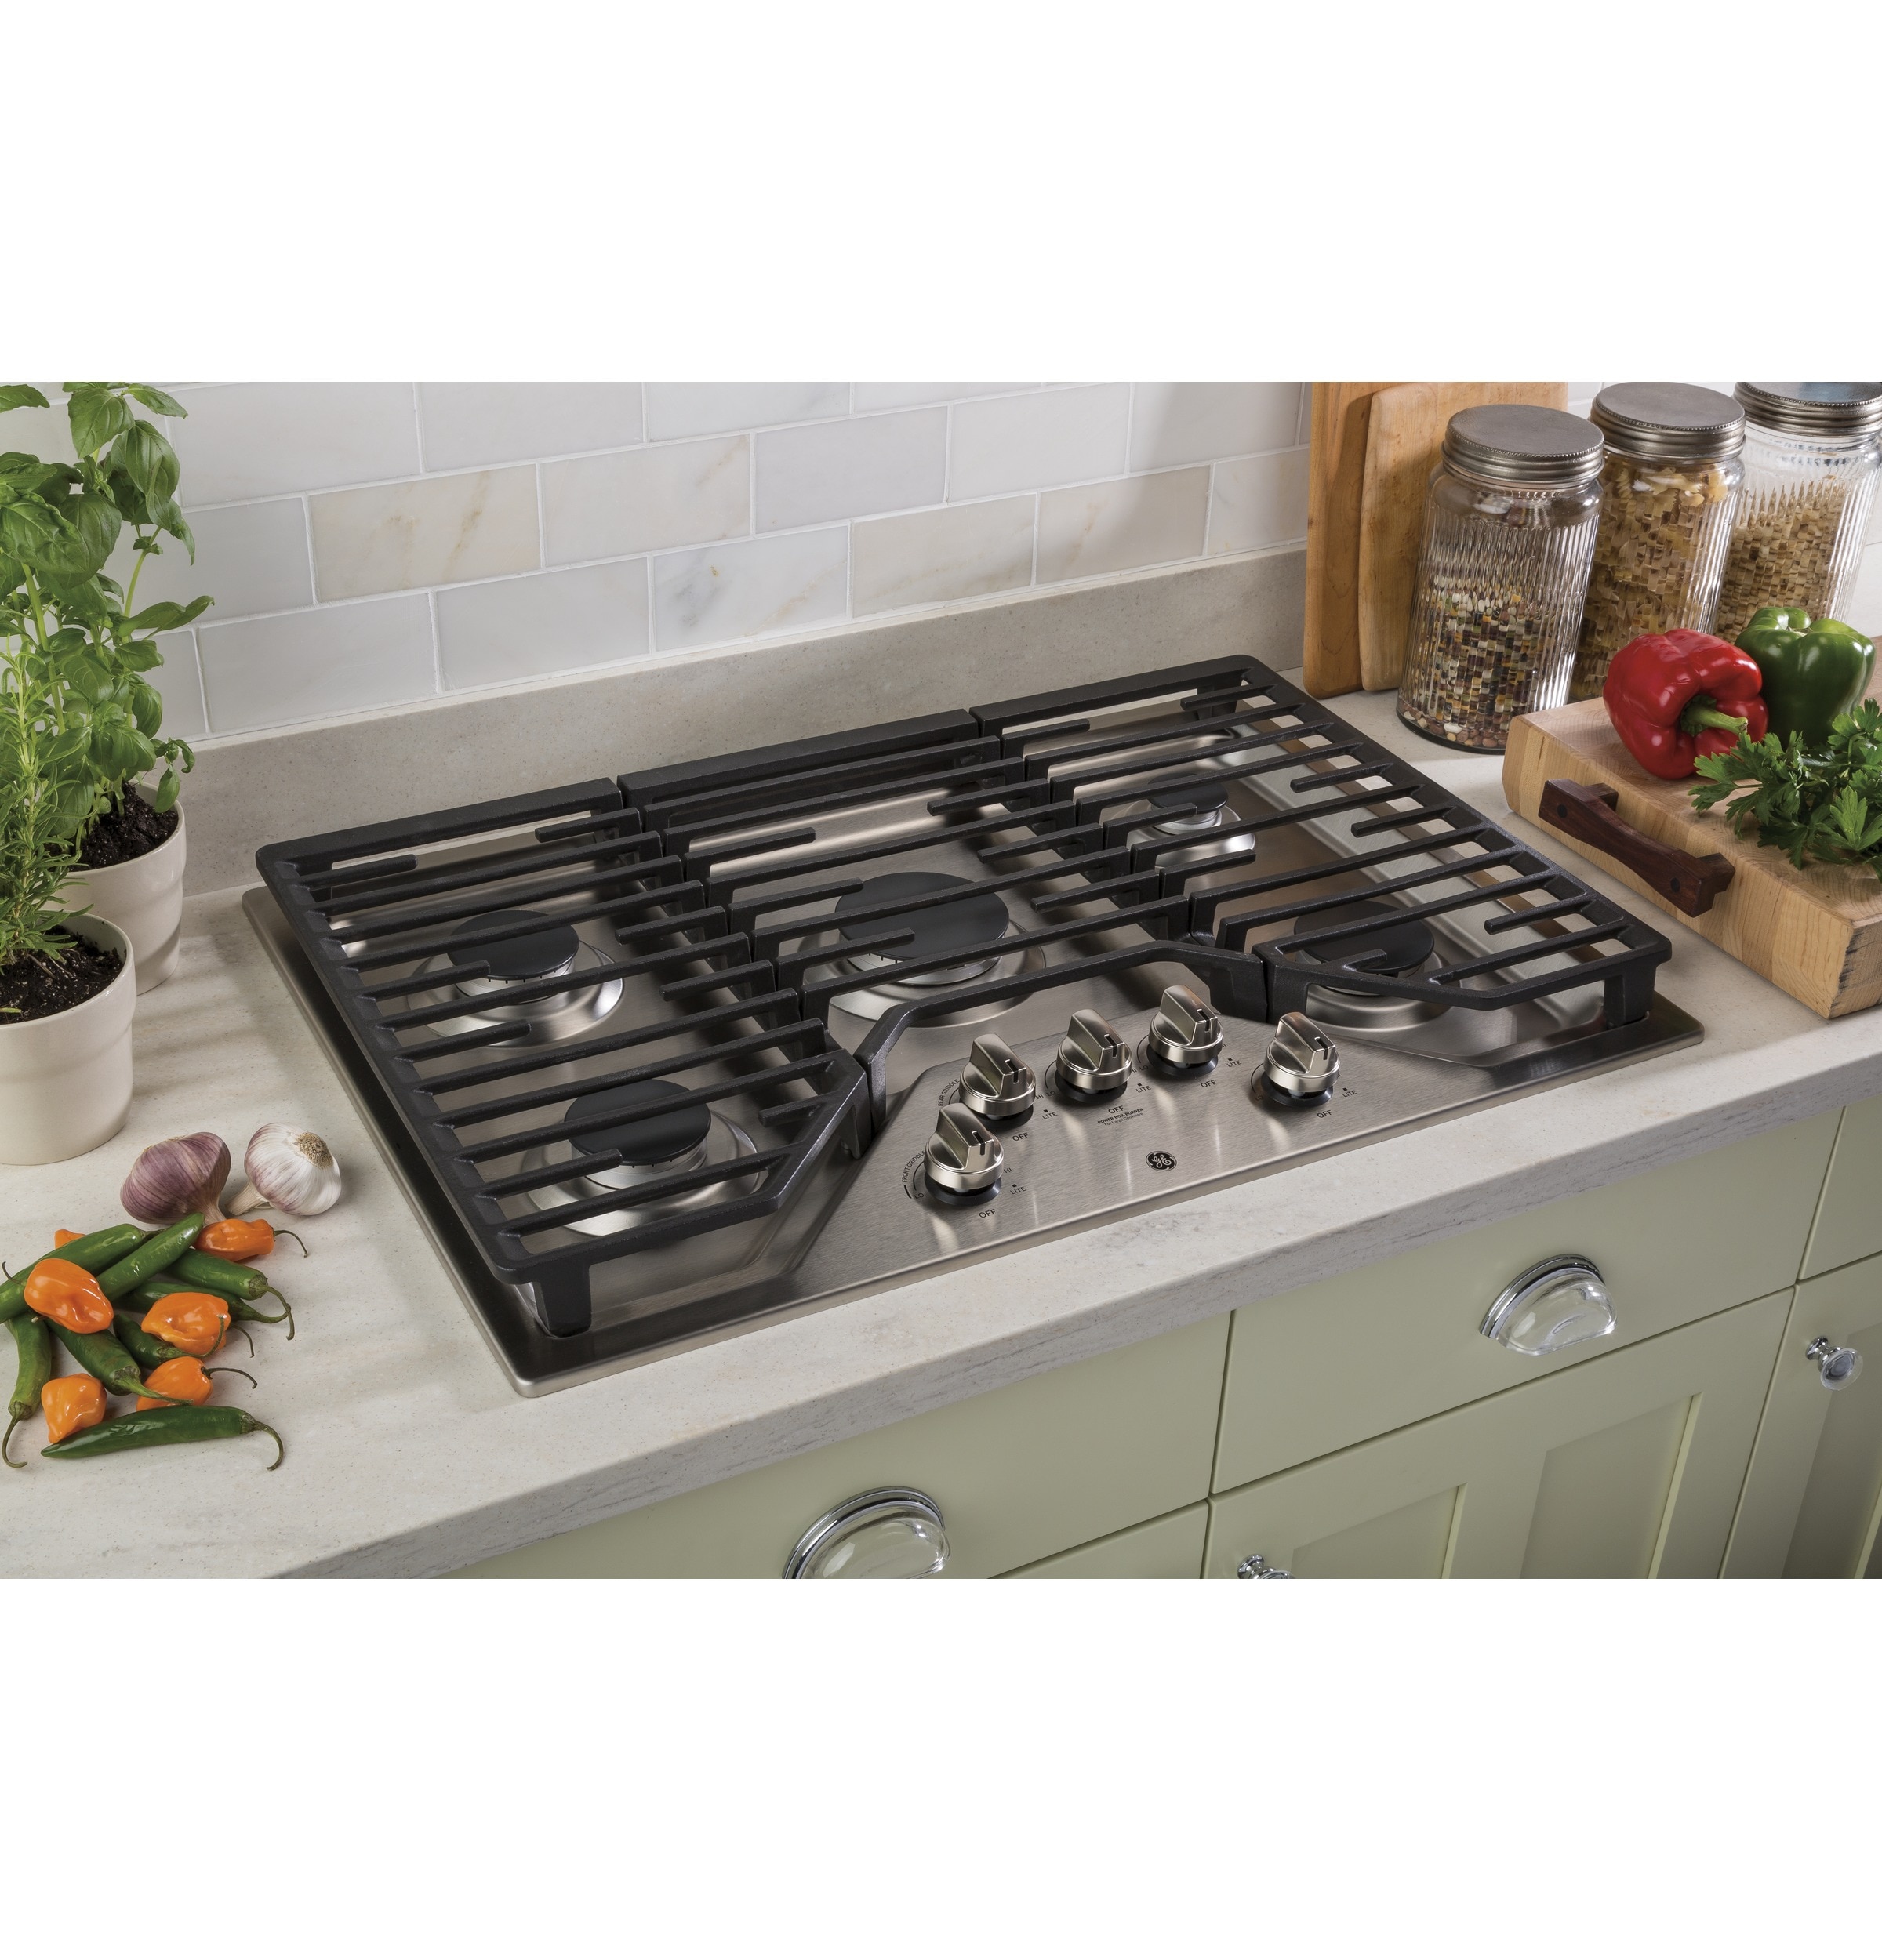 GE 30-in 5 Burners Stainless Steel Gas Cooktop in the Gas Cooktops